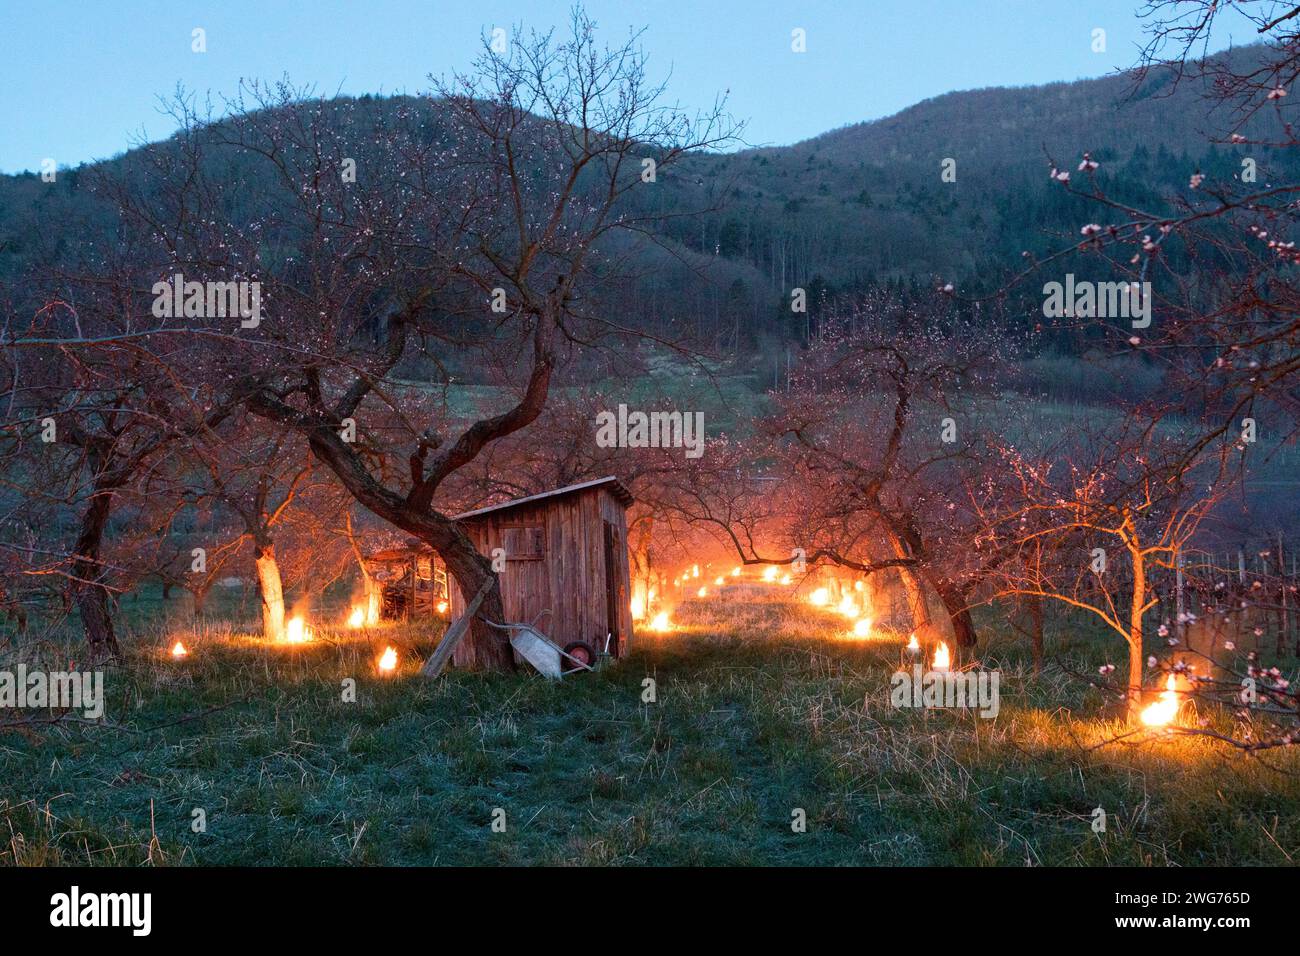 Heater Candles To Protect The Wachauer Marillenblüte From The Night Frost, NÖ, Austria Stock Photo